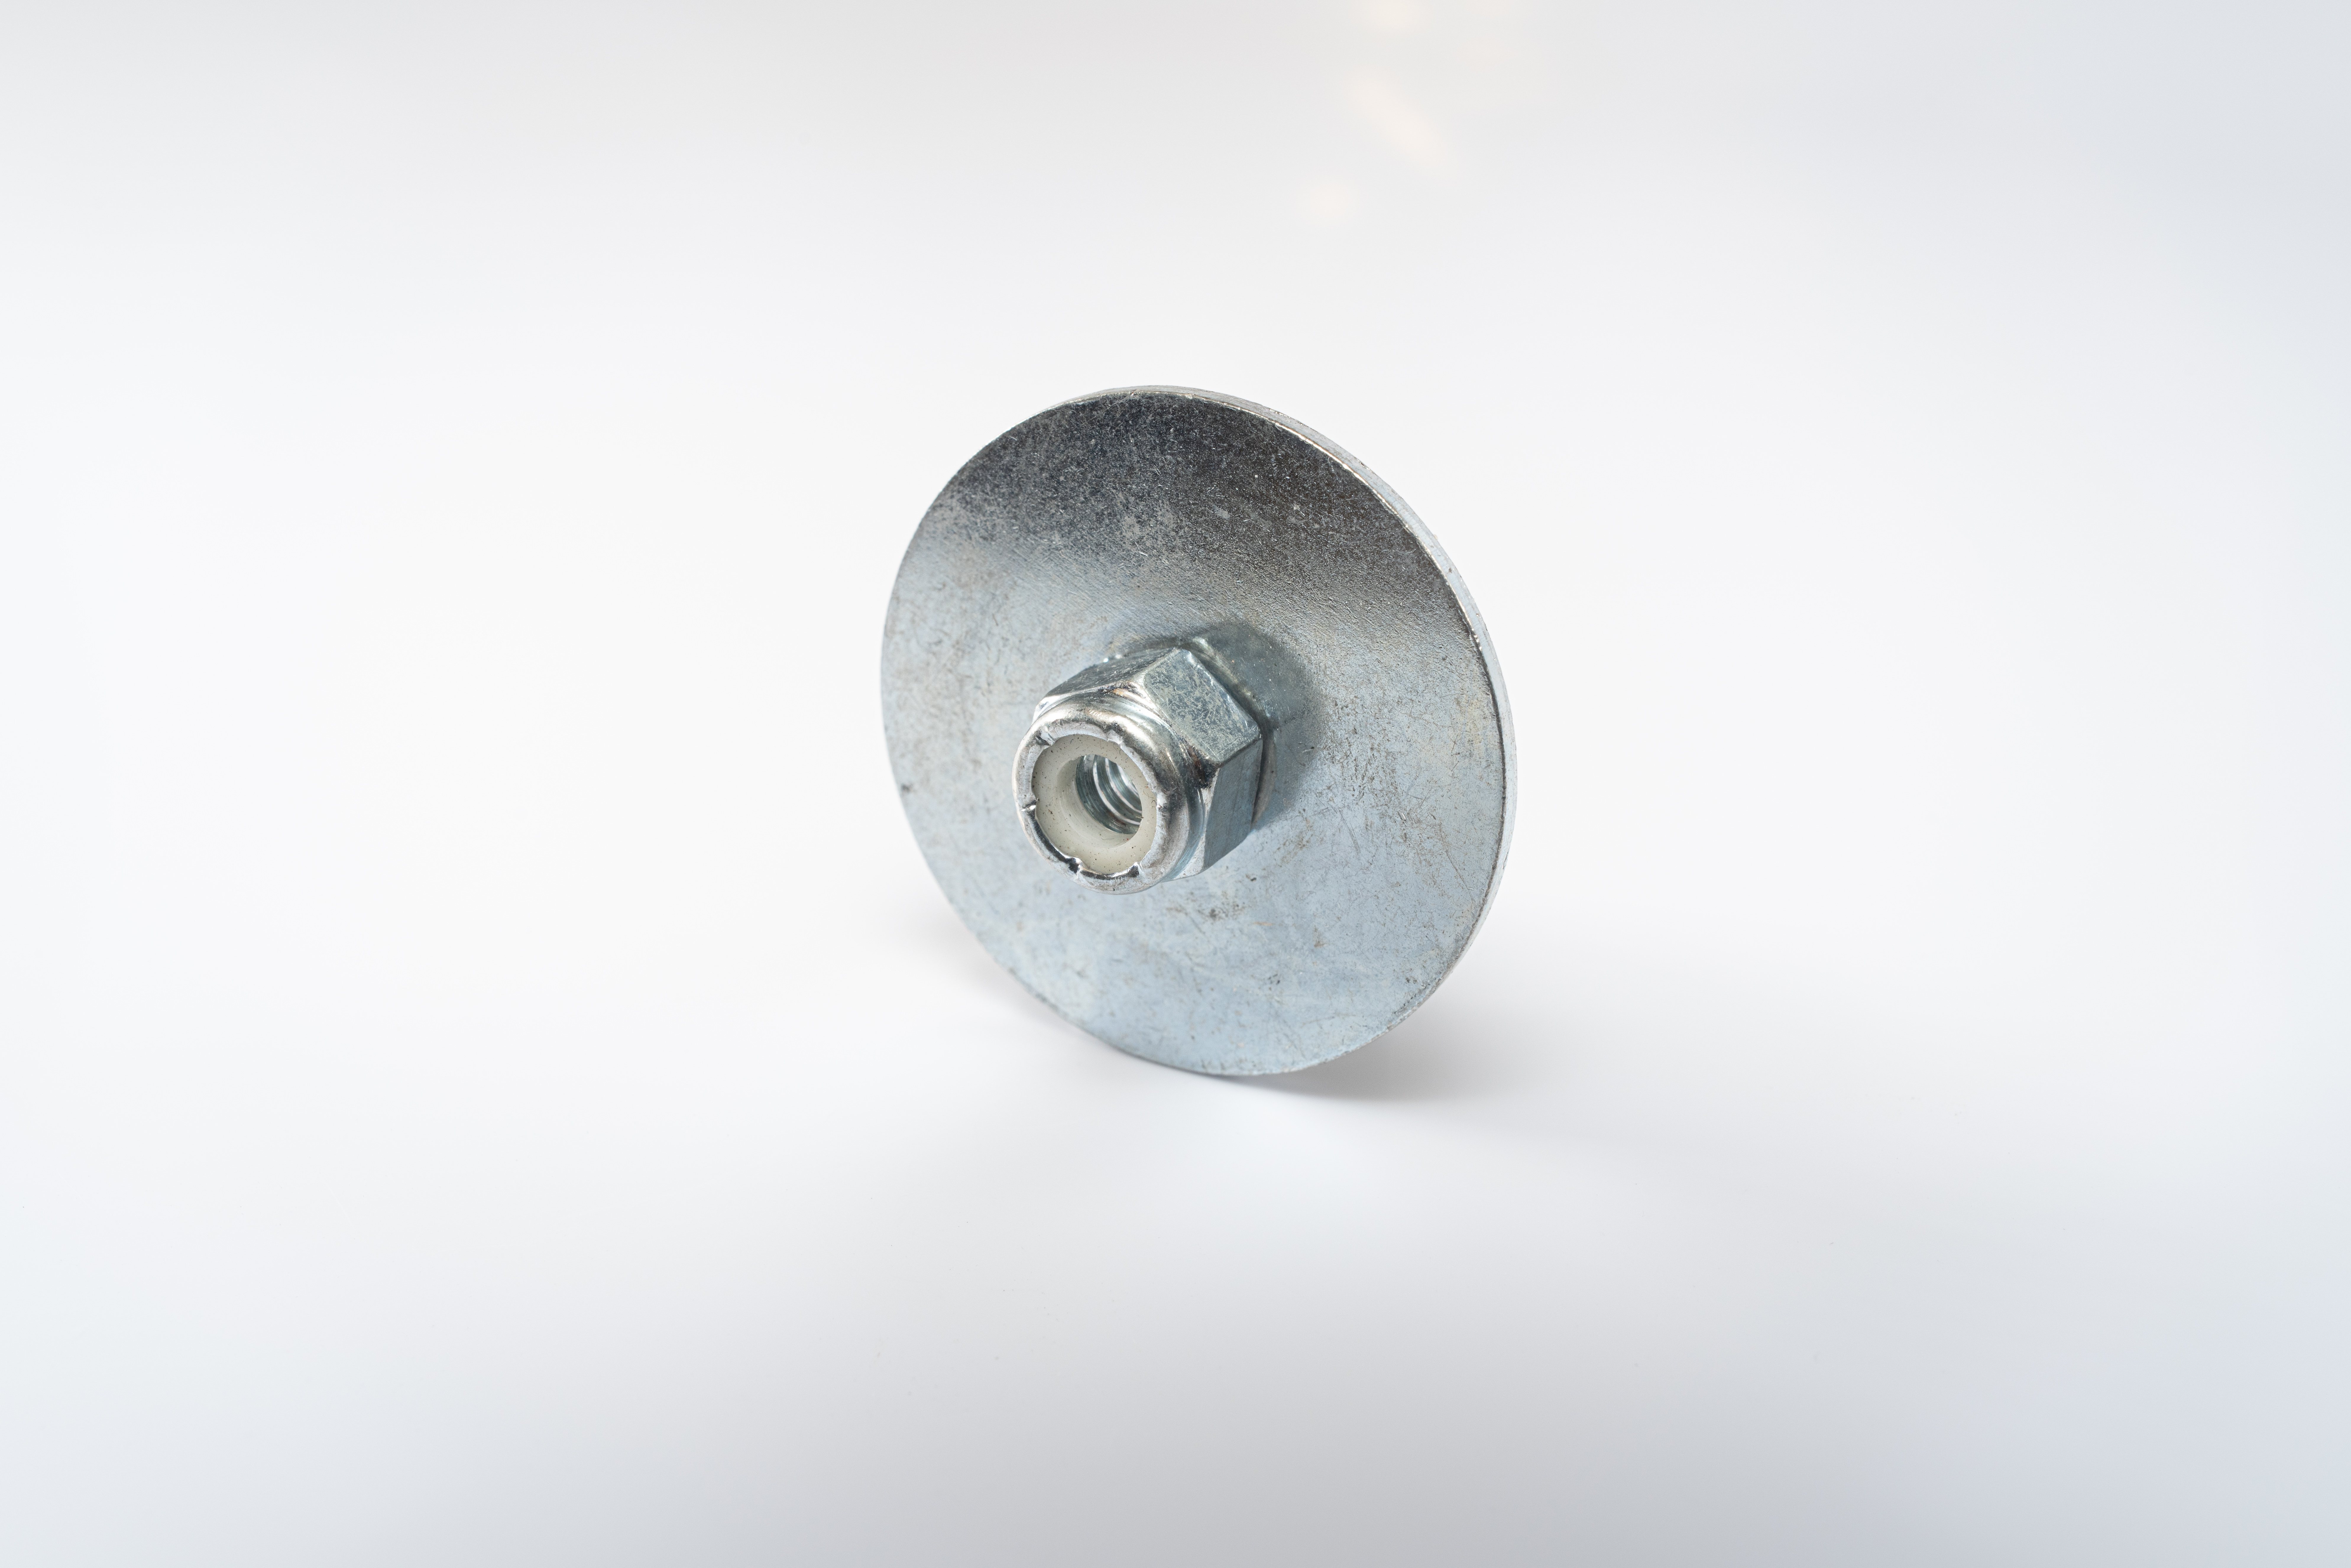 Large Washer Conical Nut